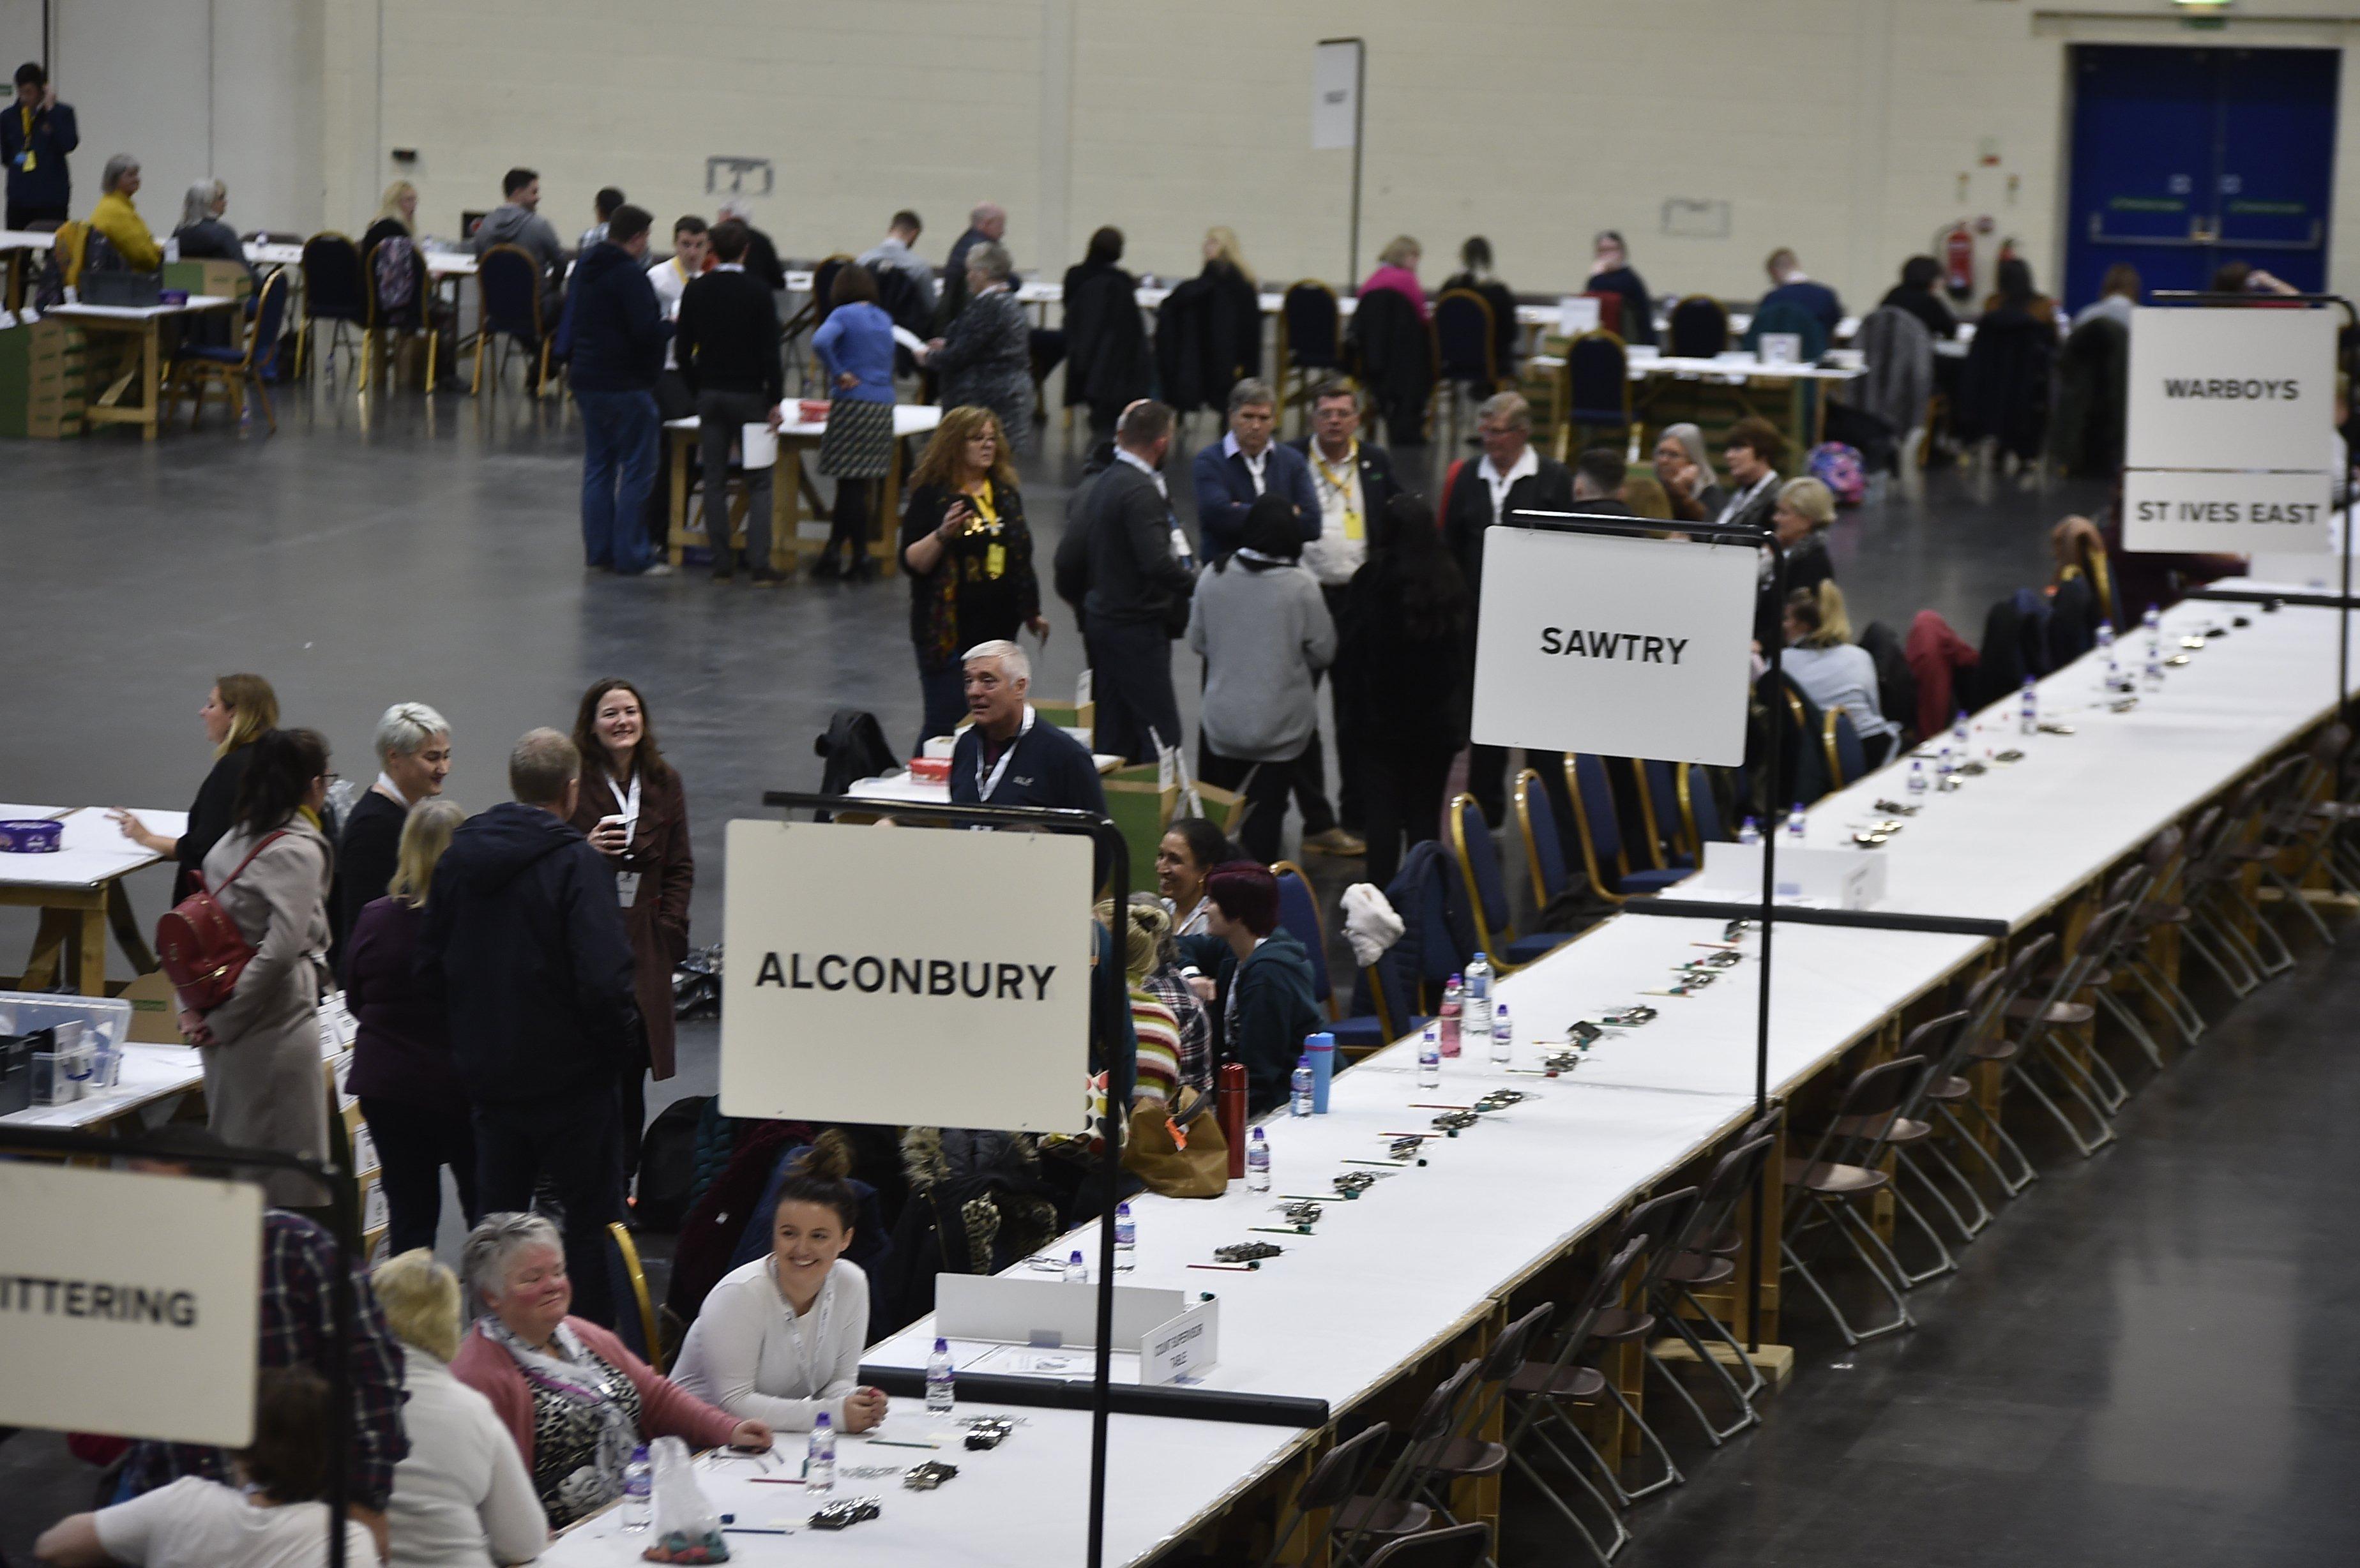 General Election count 2019 at the East of England Arena for Paul Bristow and Shailesh Vara EMN-191213-095346009